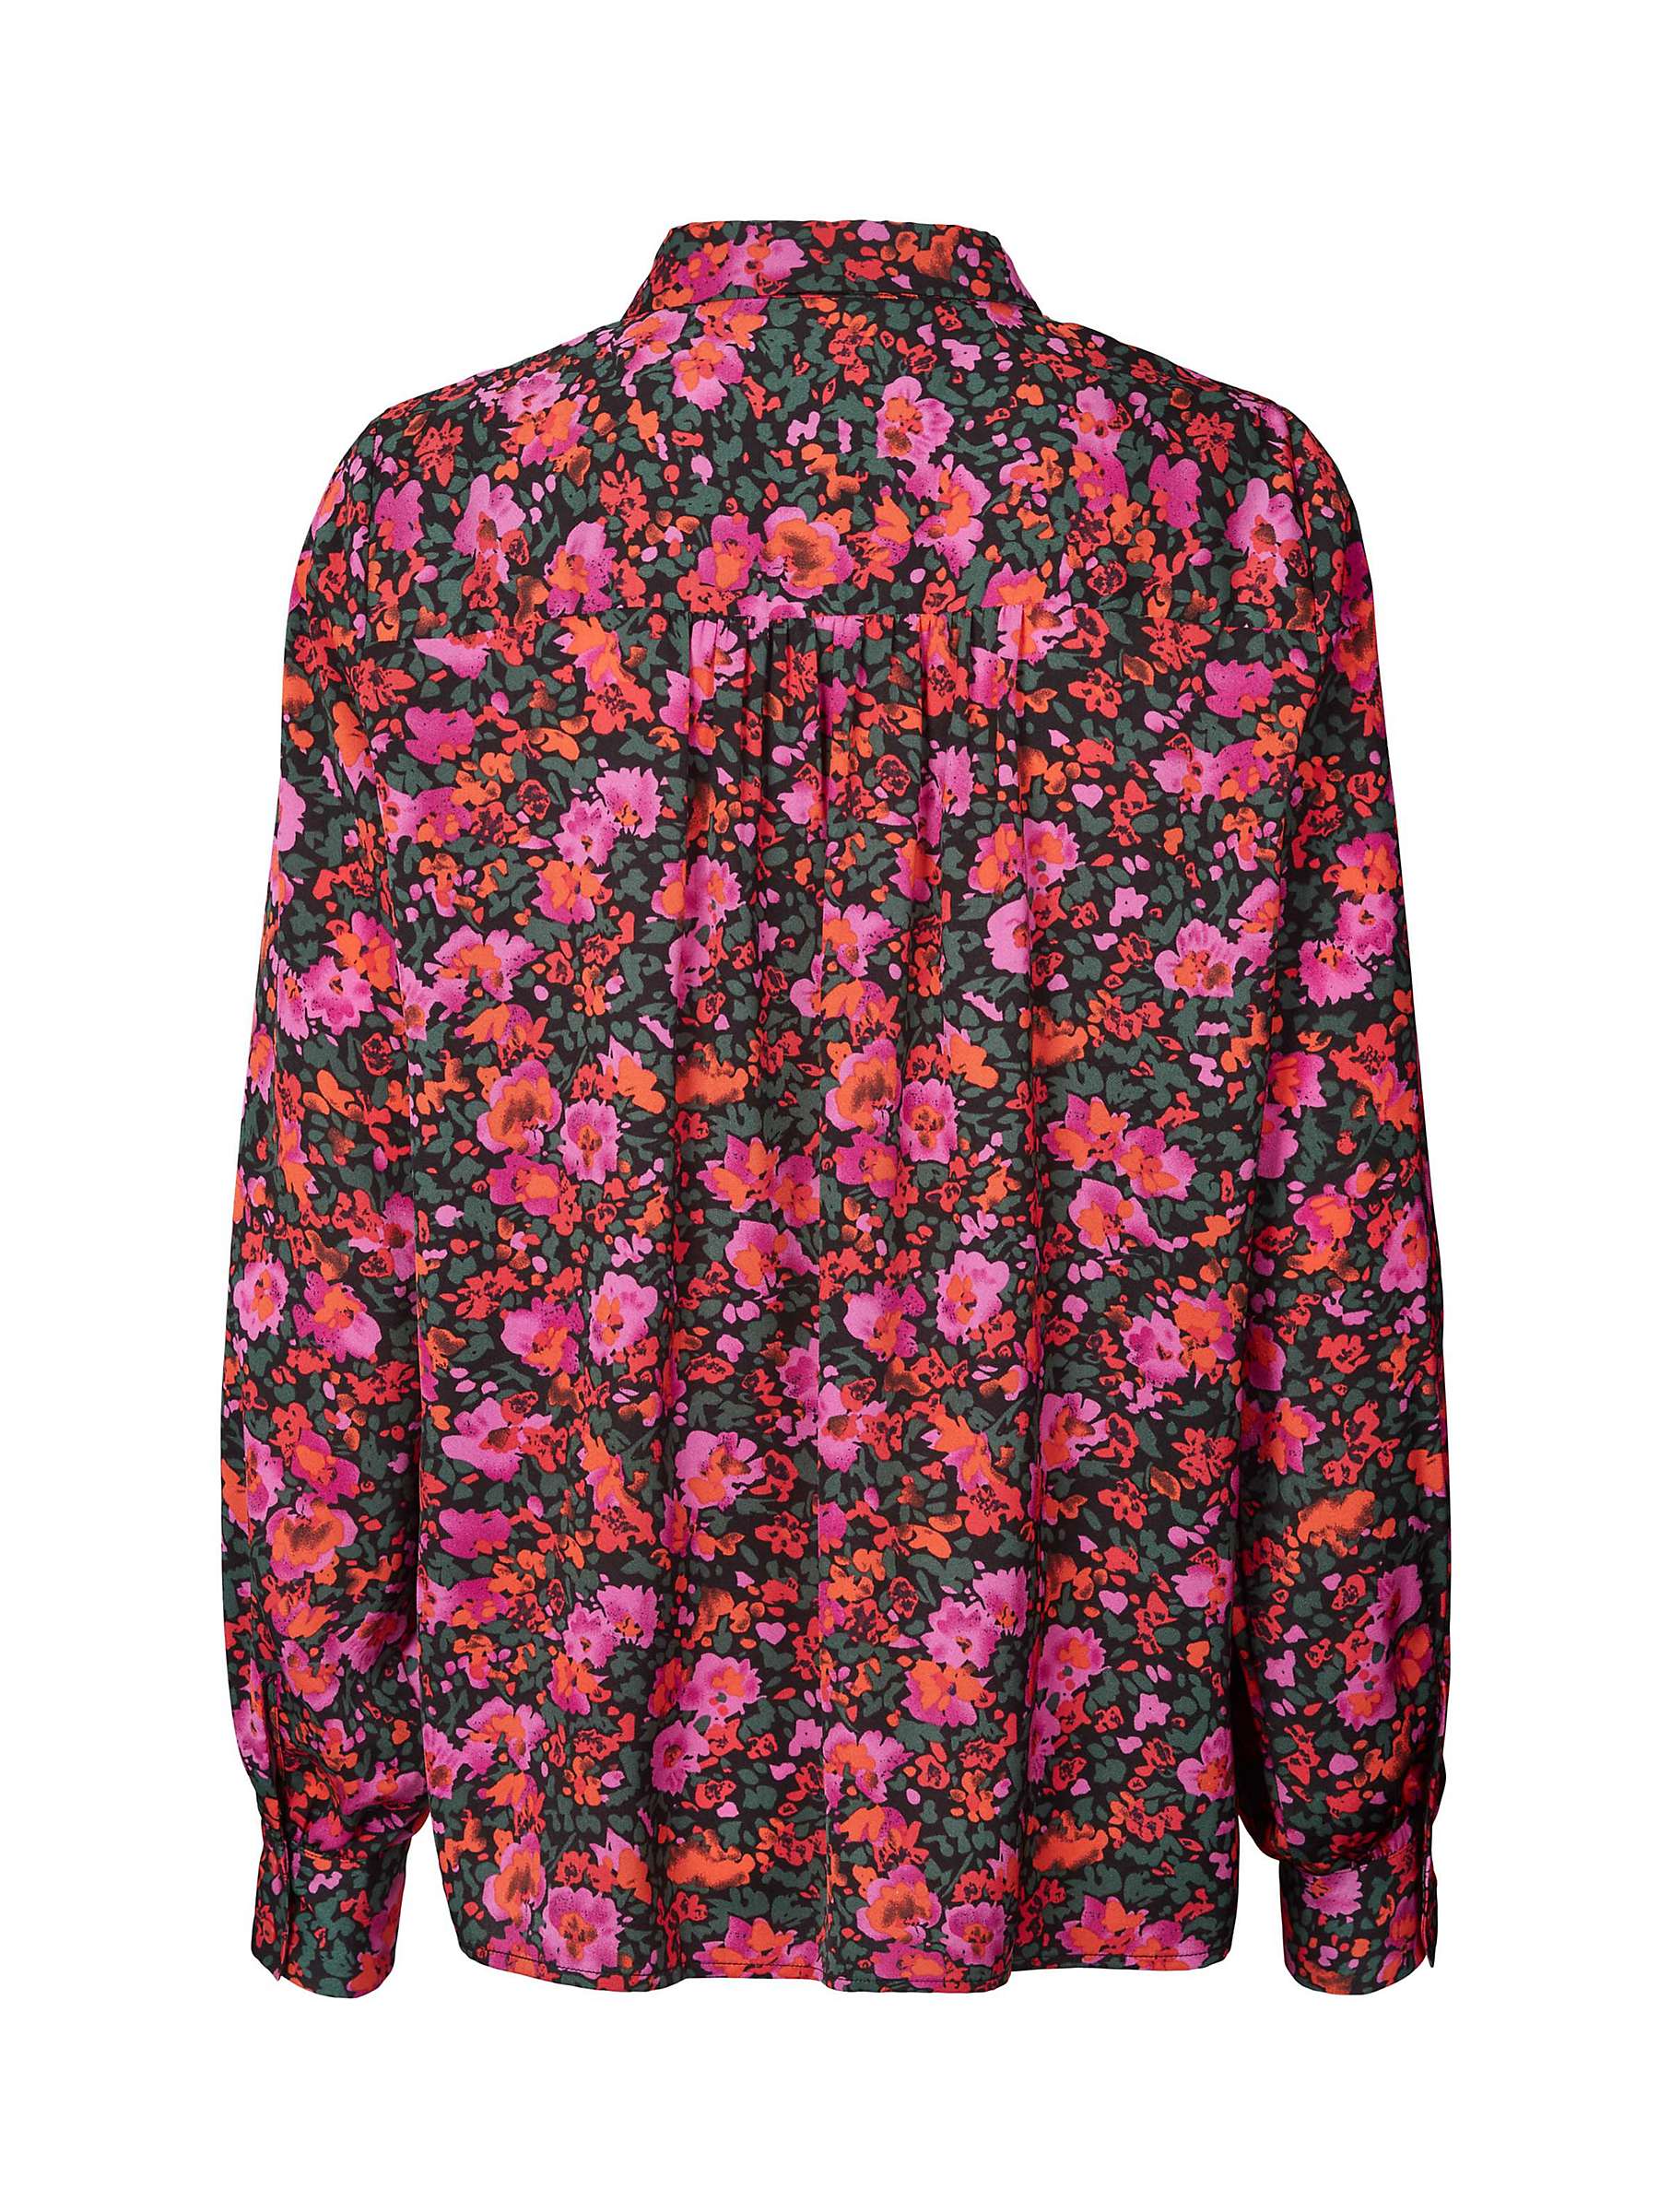 Lollys Laundry Allison Floral Print Shirt, Red at John Lewis & Partners